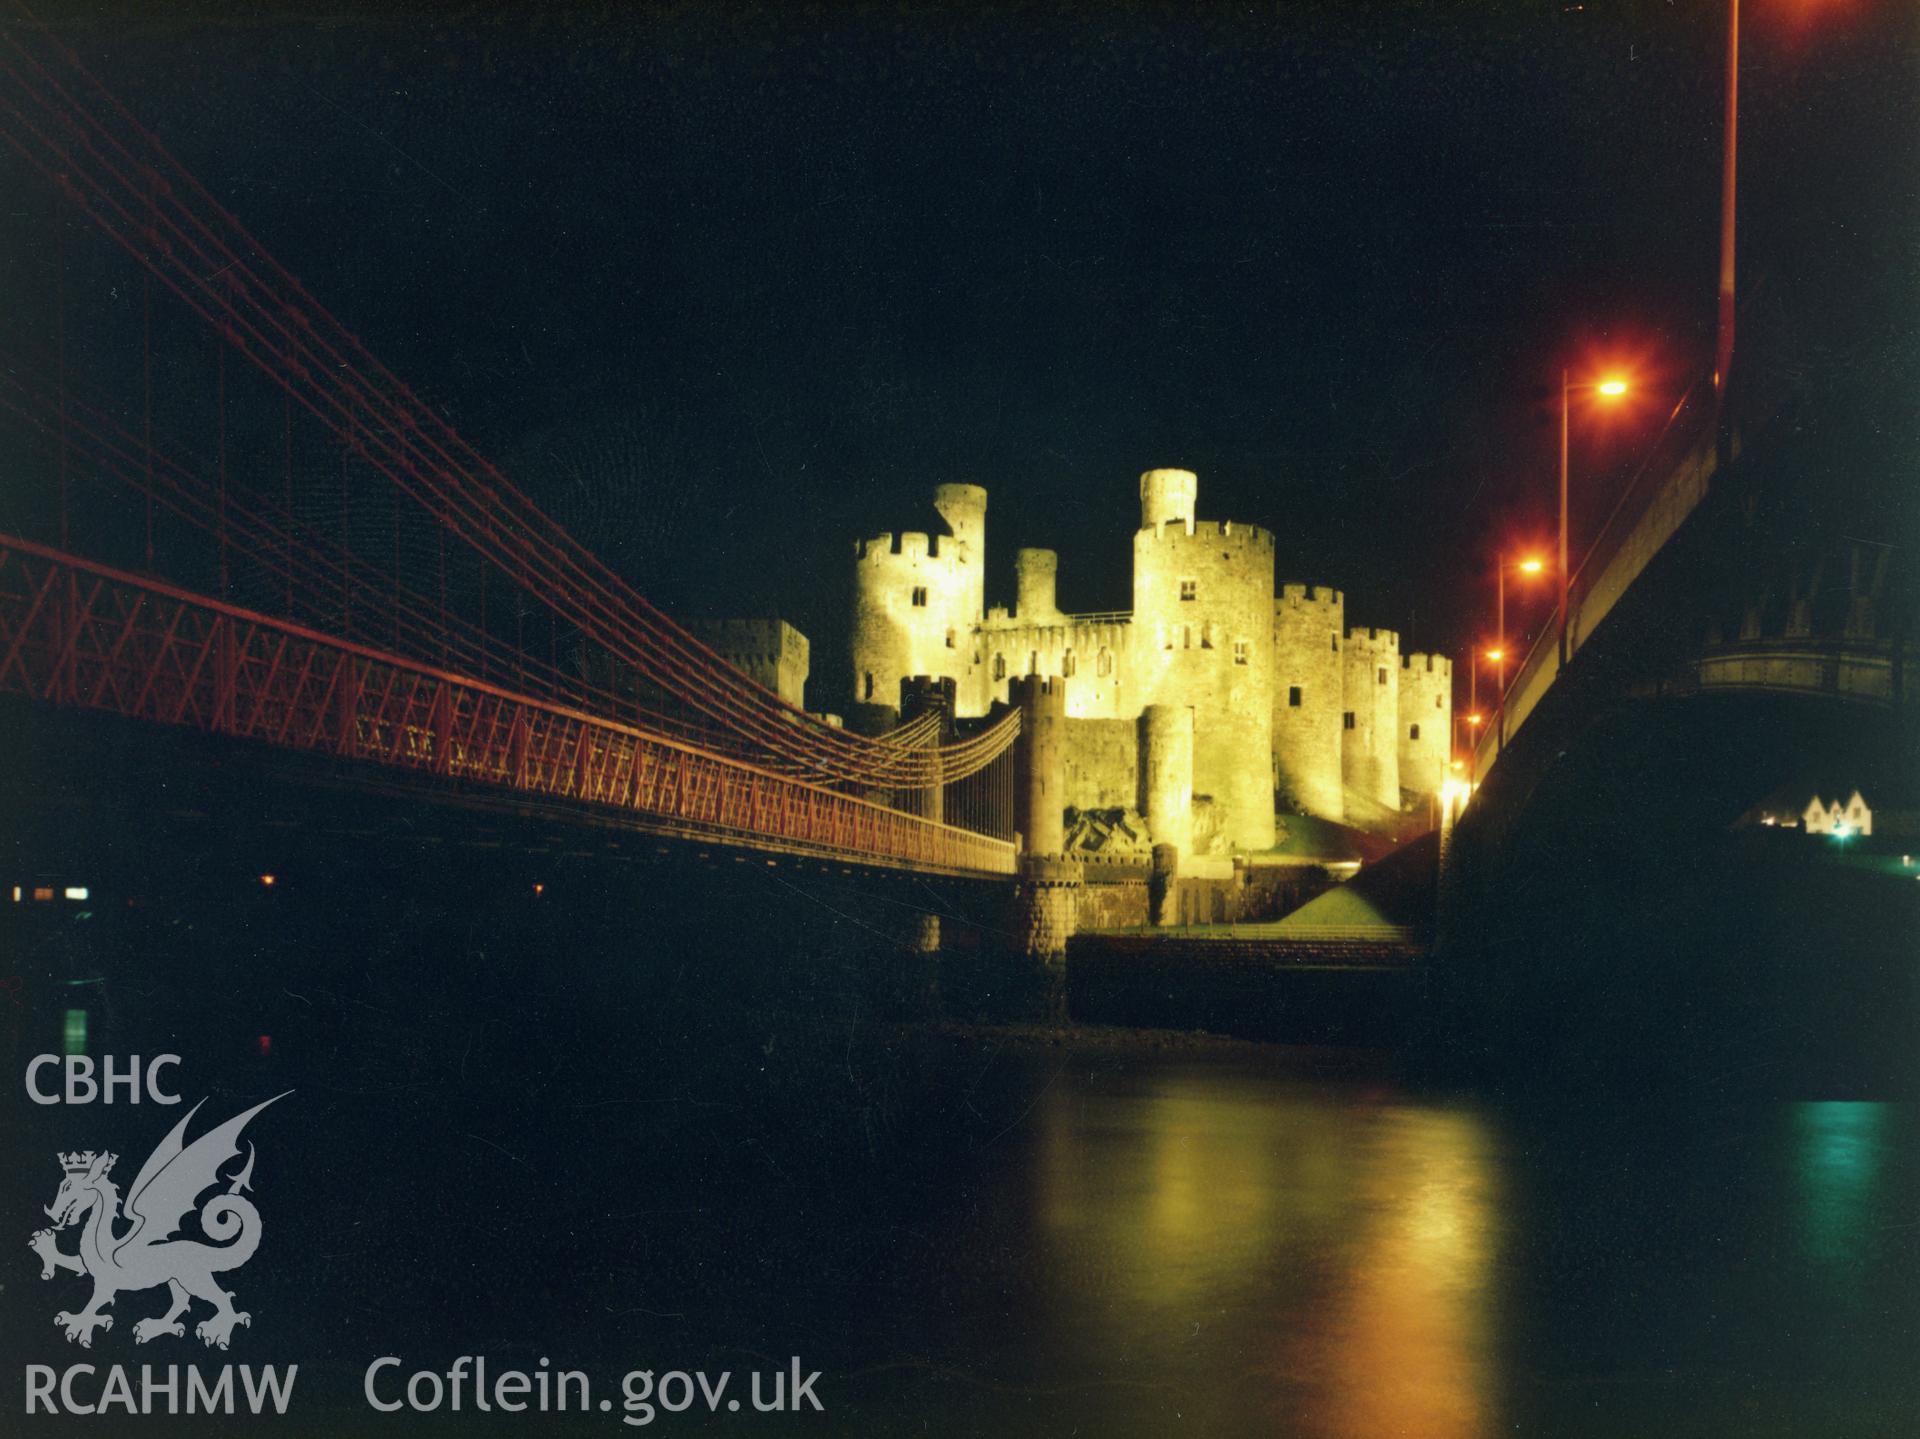 1 colour print showing night view of Conwy castle, collated by the former Central Office of Information.